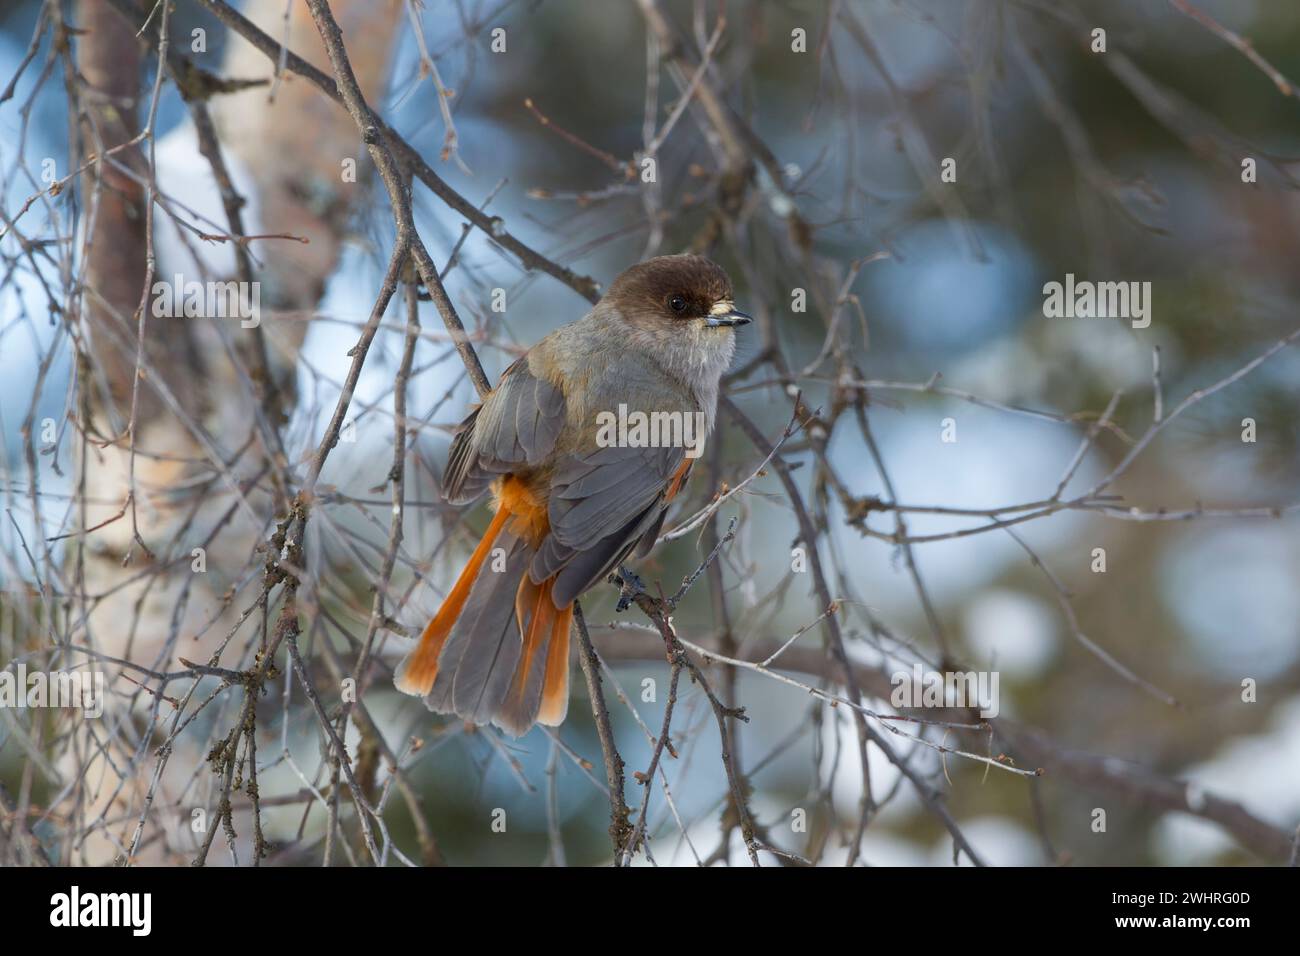 Siberian Jay (Perisoreus infaustus), perched on a thin branch showing back, wing and tail plumage.  Boreal forest in Finland during winter. Stock Photo